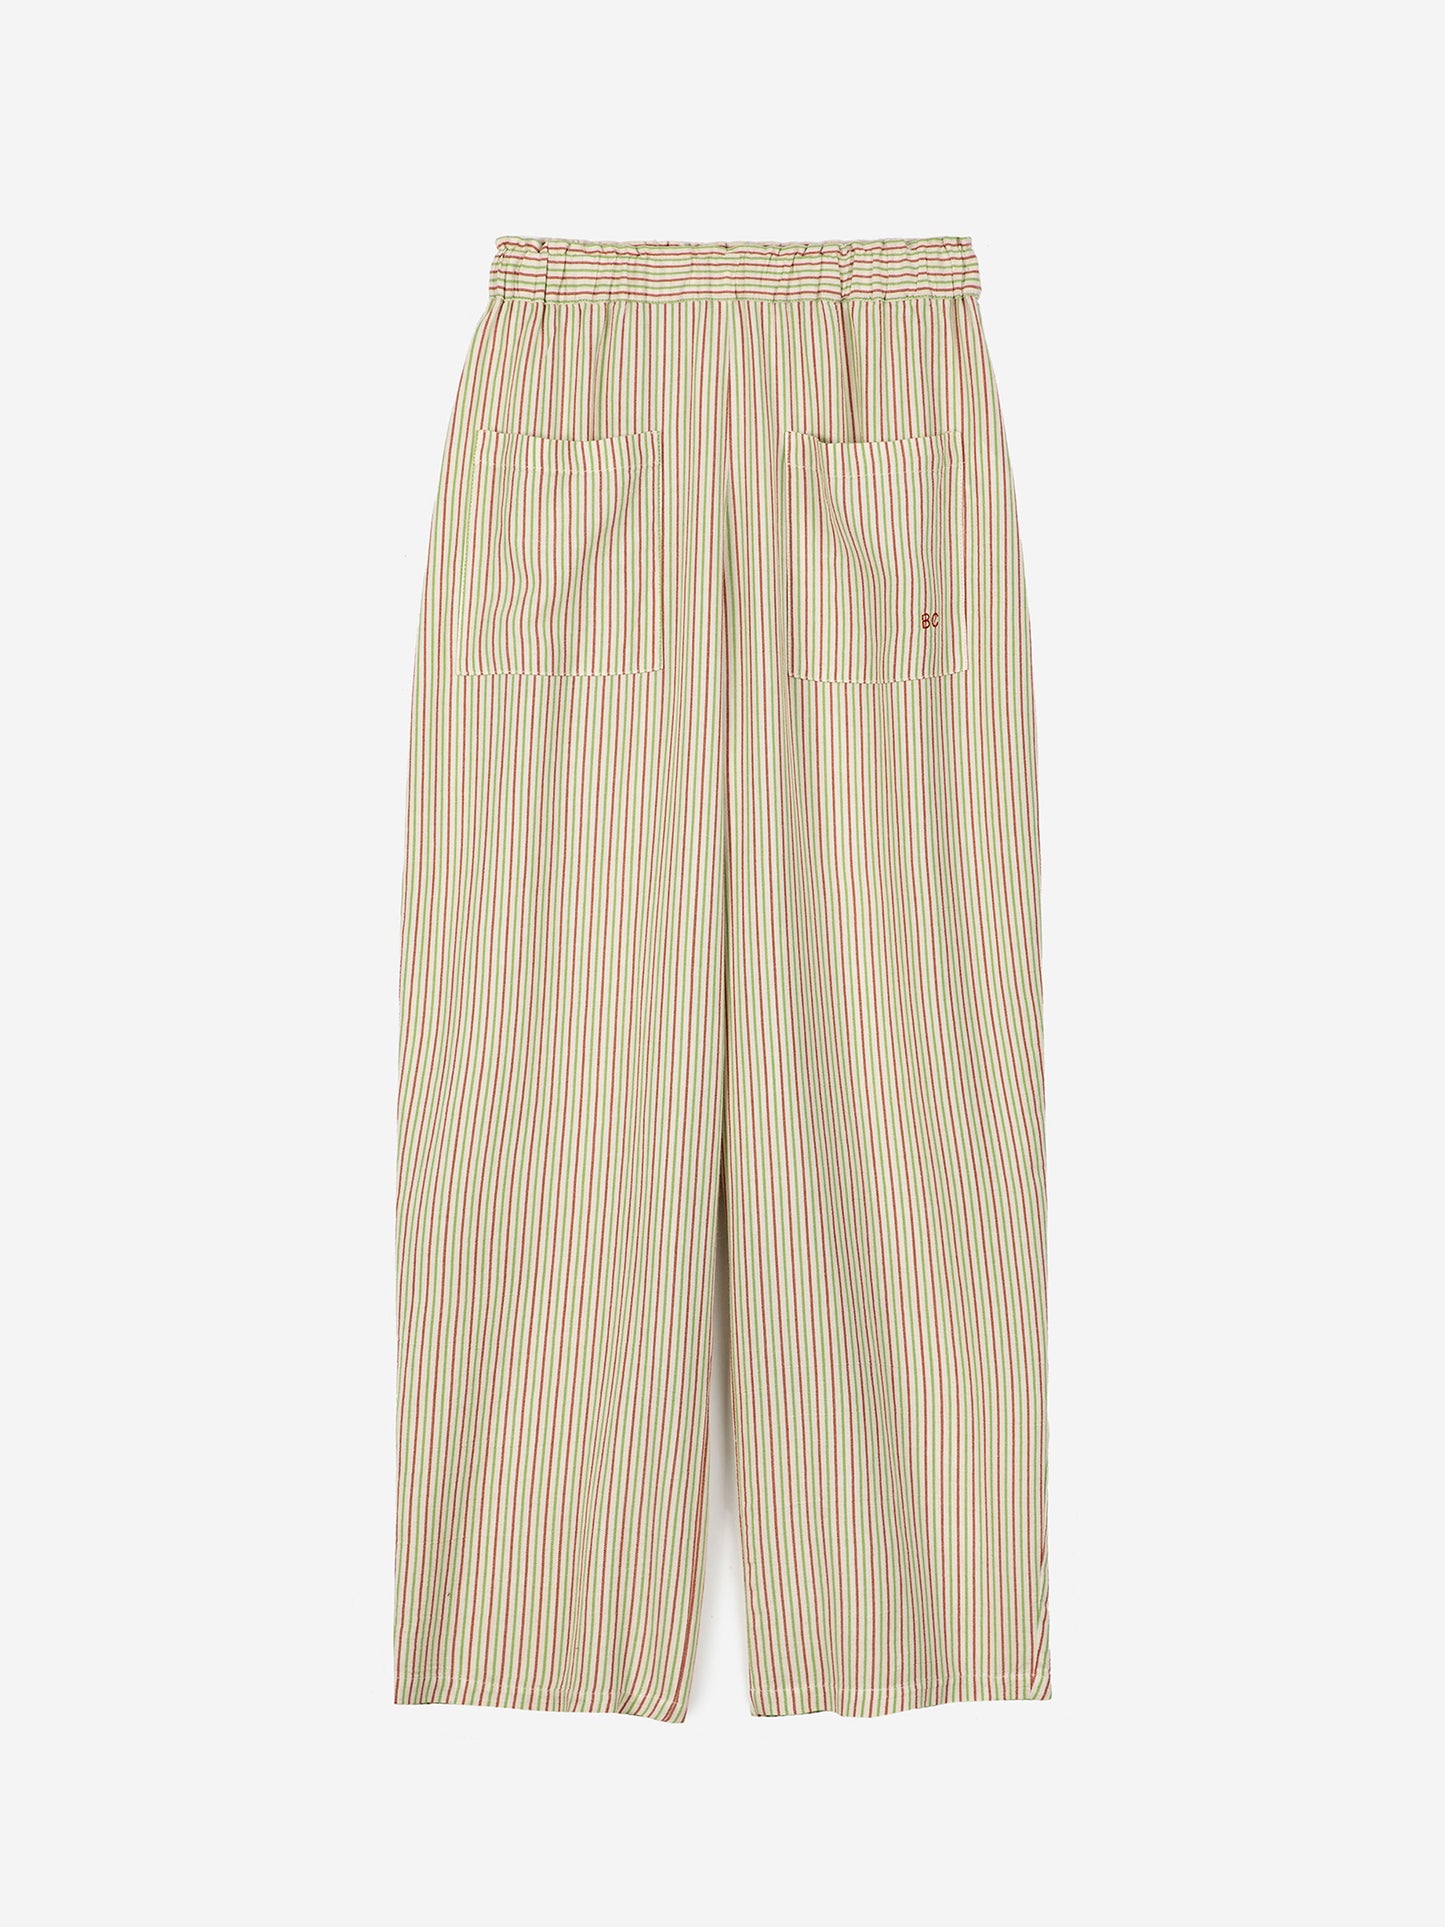 Vertical multi striped cocoon pant